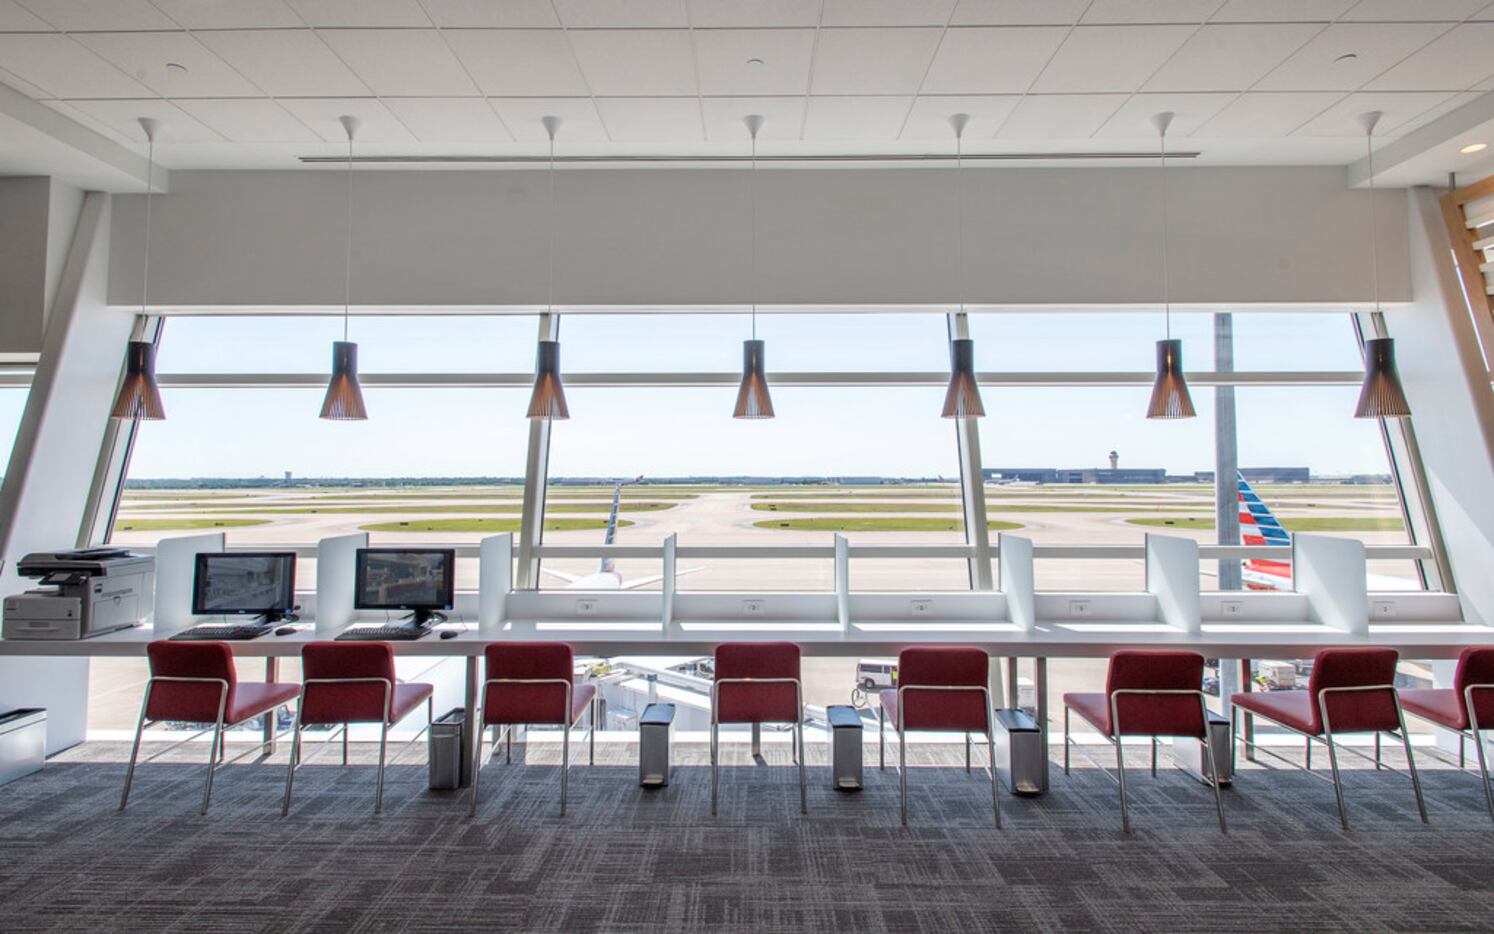 A business seating area overlooks the tarmac in the new American Airlines Flagship Lounge on...